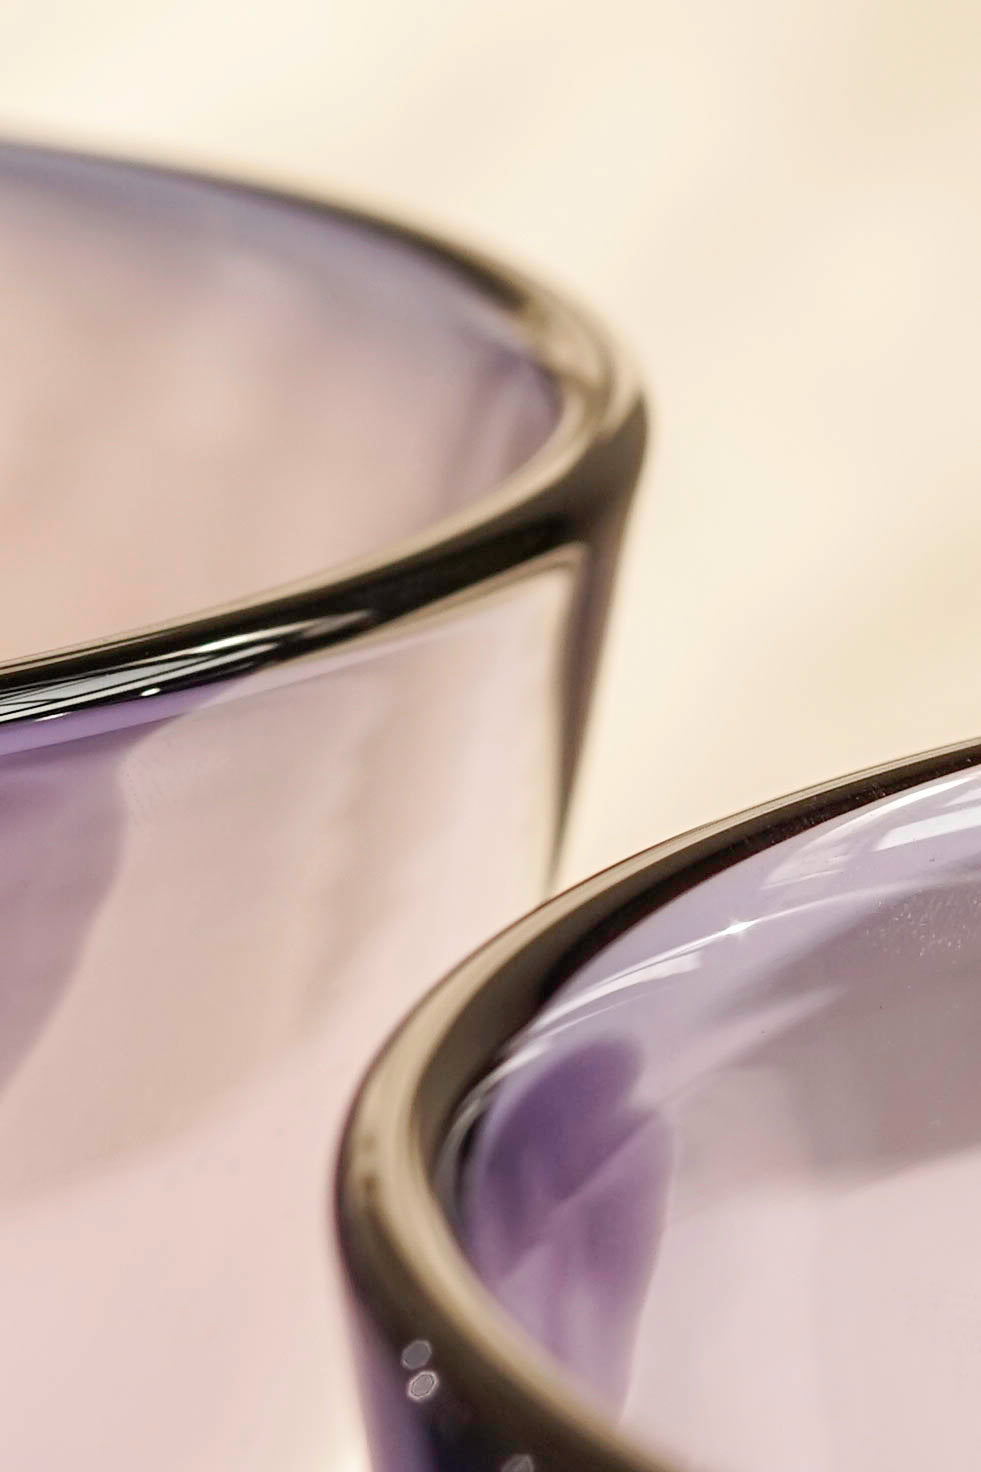 The edges of two gem glass bowls from Lindean Mill in violet.